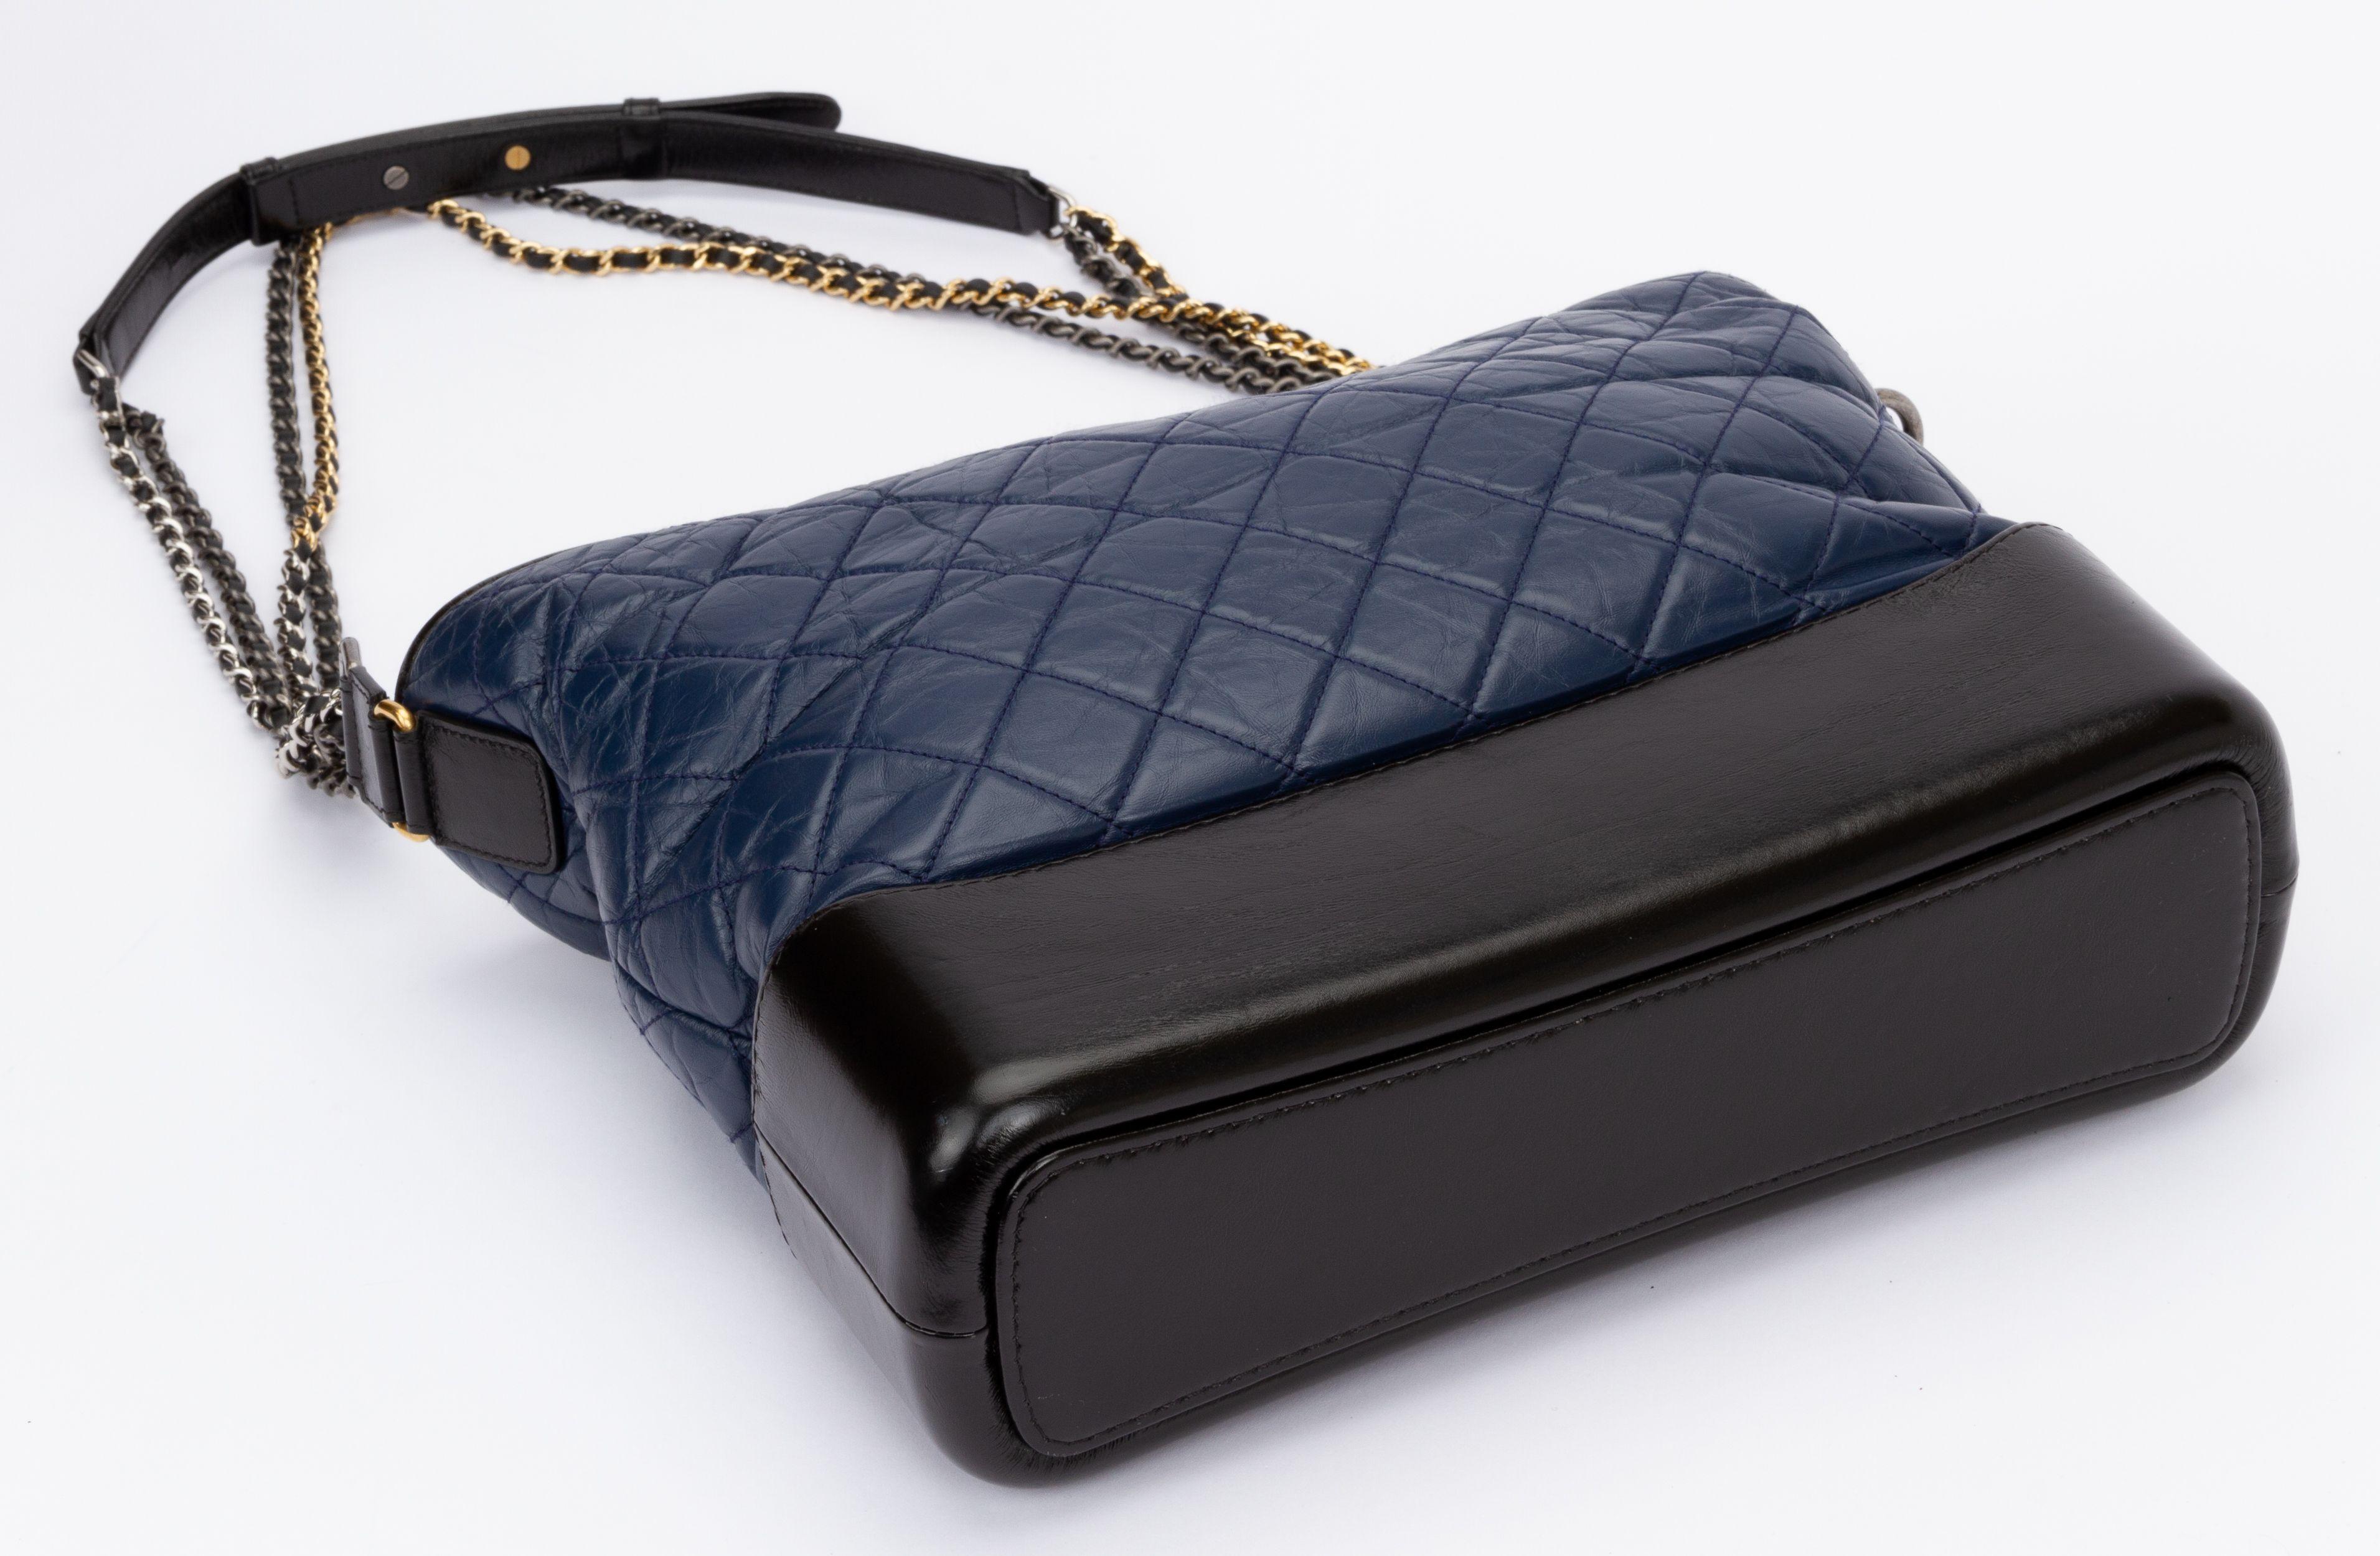 Chanel Large Blue Black Gabrielle Bag In Excellent Condition For Sale In West Hollywood, CA